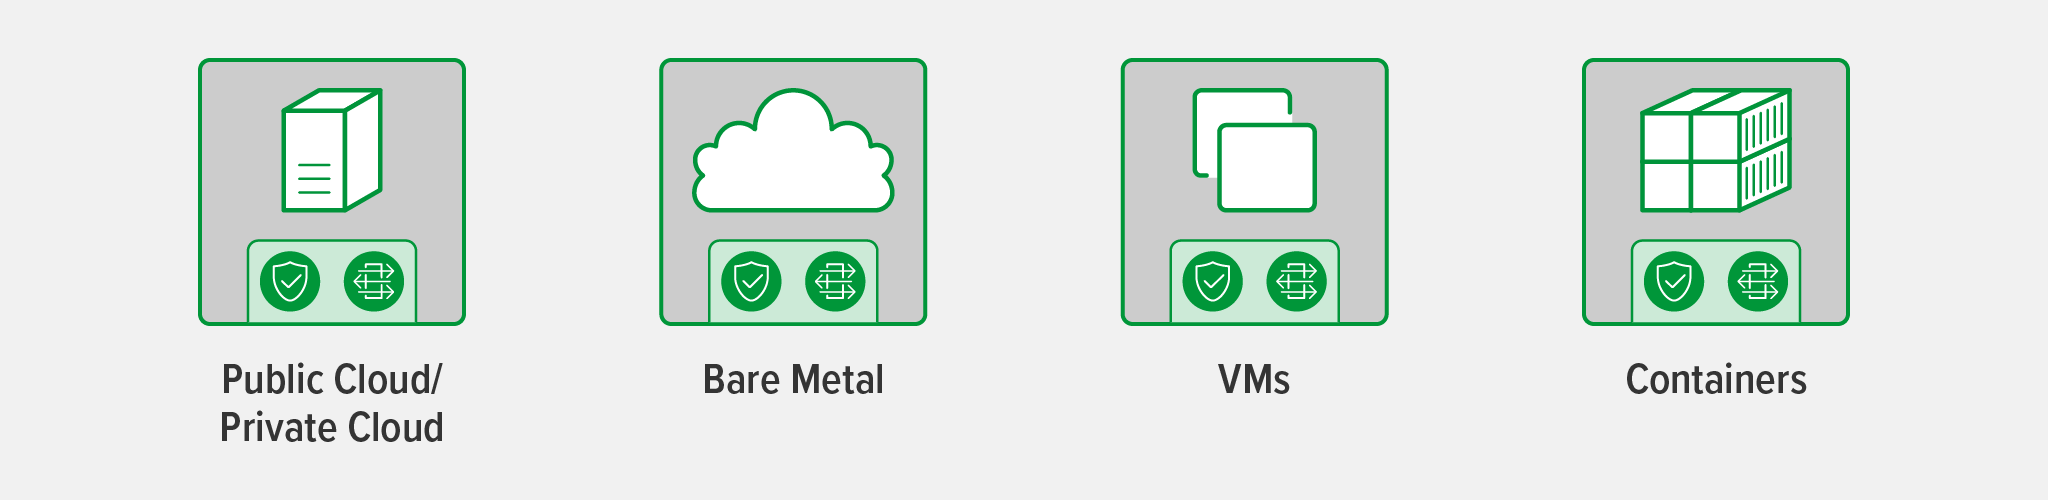 NGINX software can be deployed anywhere: the public cloud, private cloud, bare metal, VMs, and containers